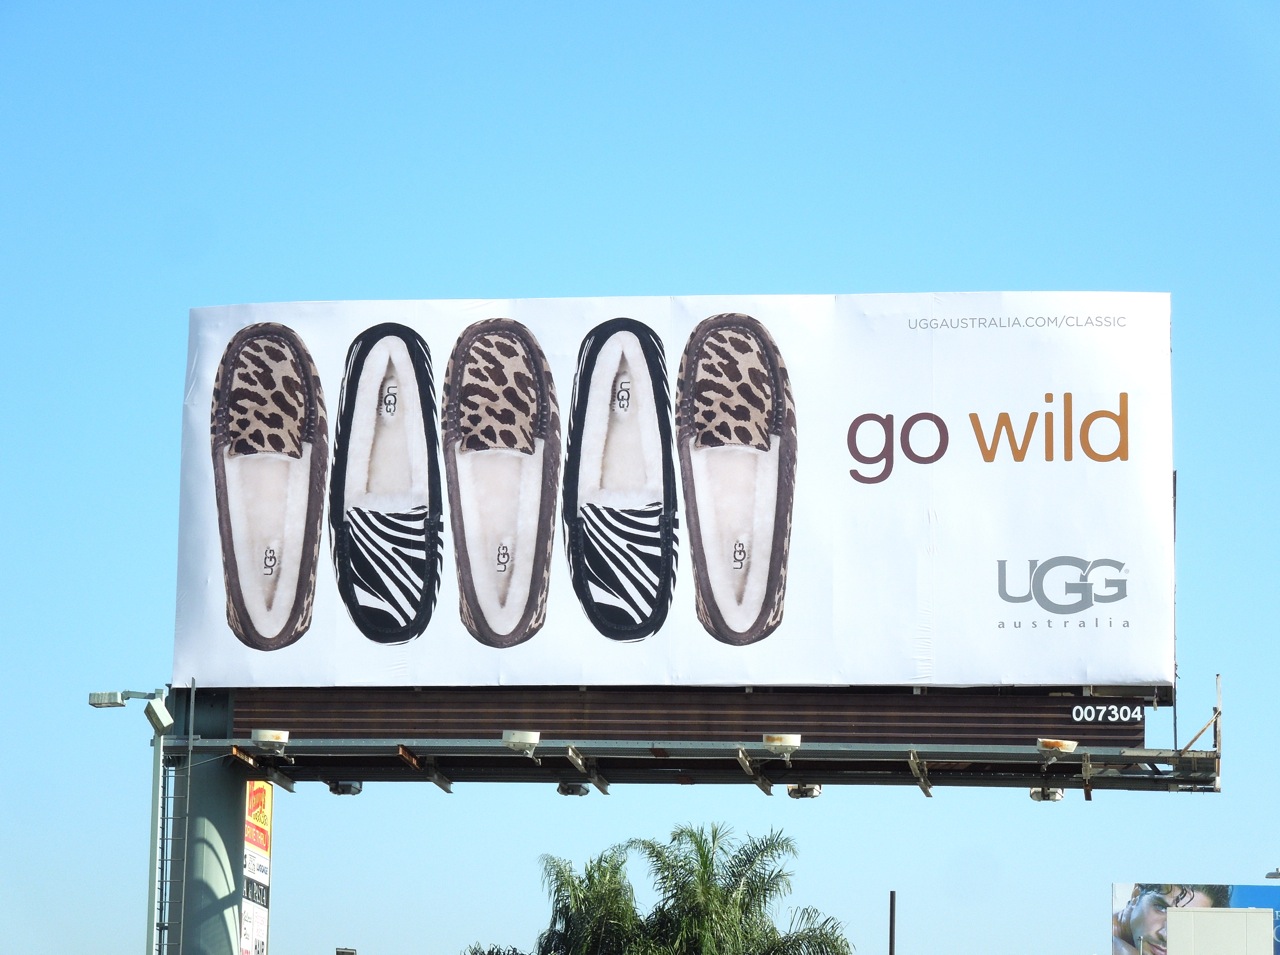 Daily Billboard: UGG Australia for Him and Her Winter 2012 billboards... Advertising ...